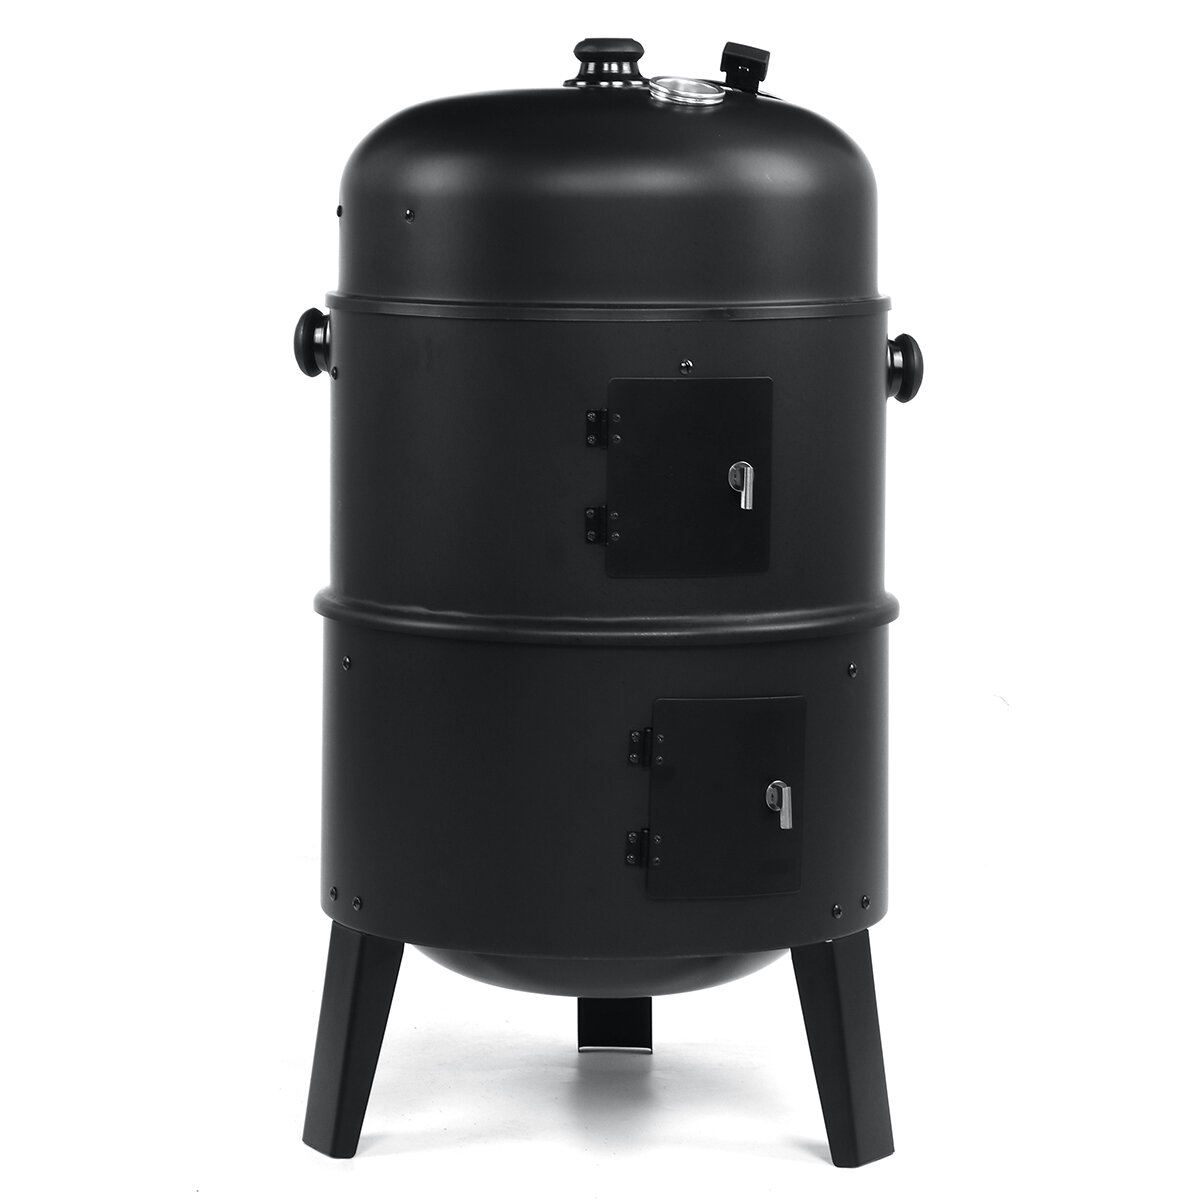 3-in-1 Portable Round Charcoal Smoker Roaster BBQ Grill With 354 Square Inches Cooking Space Built-in Thermometer Garden